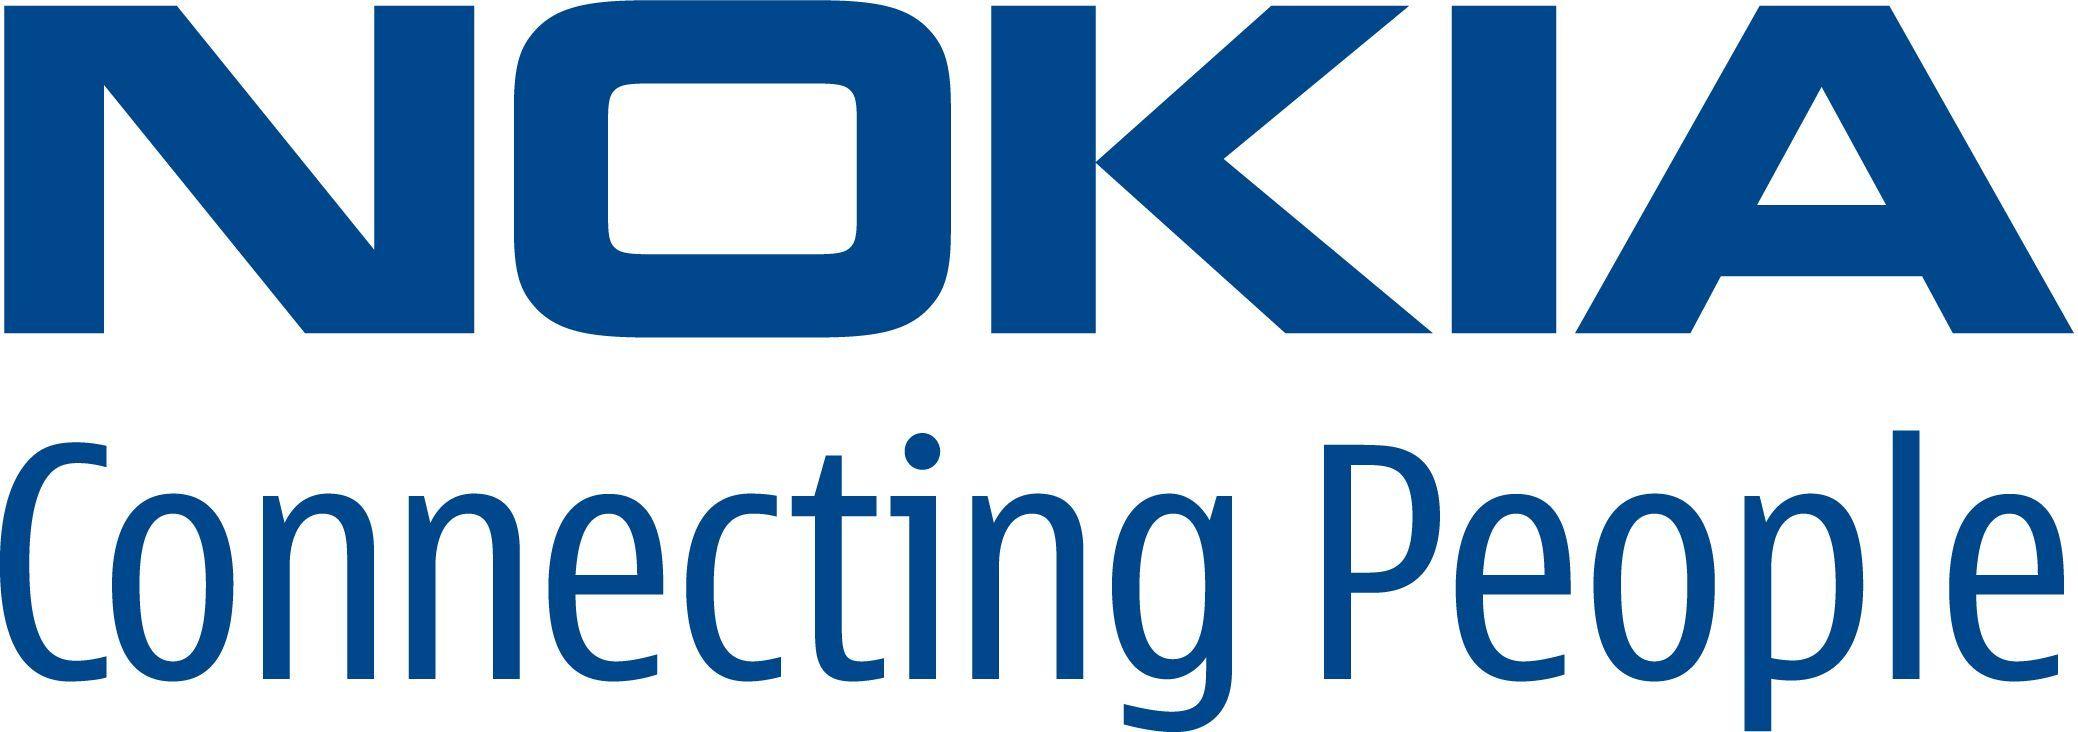 Cell Phones Companies Logo - Nokia returning to making cell phones next year. technology